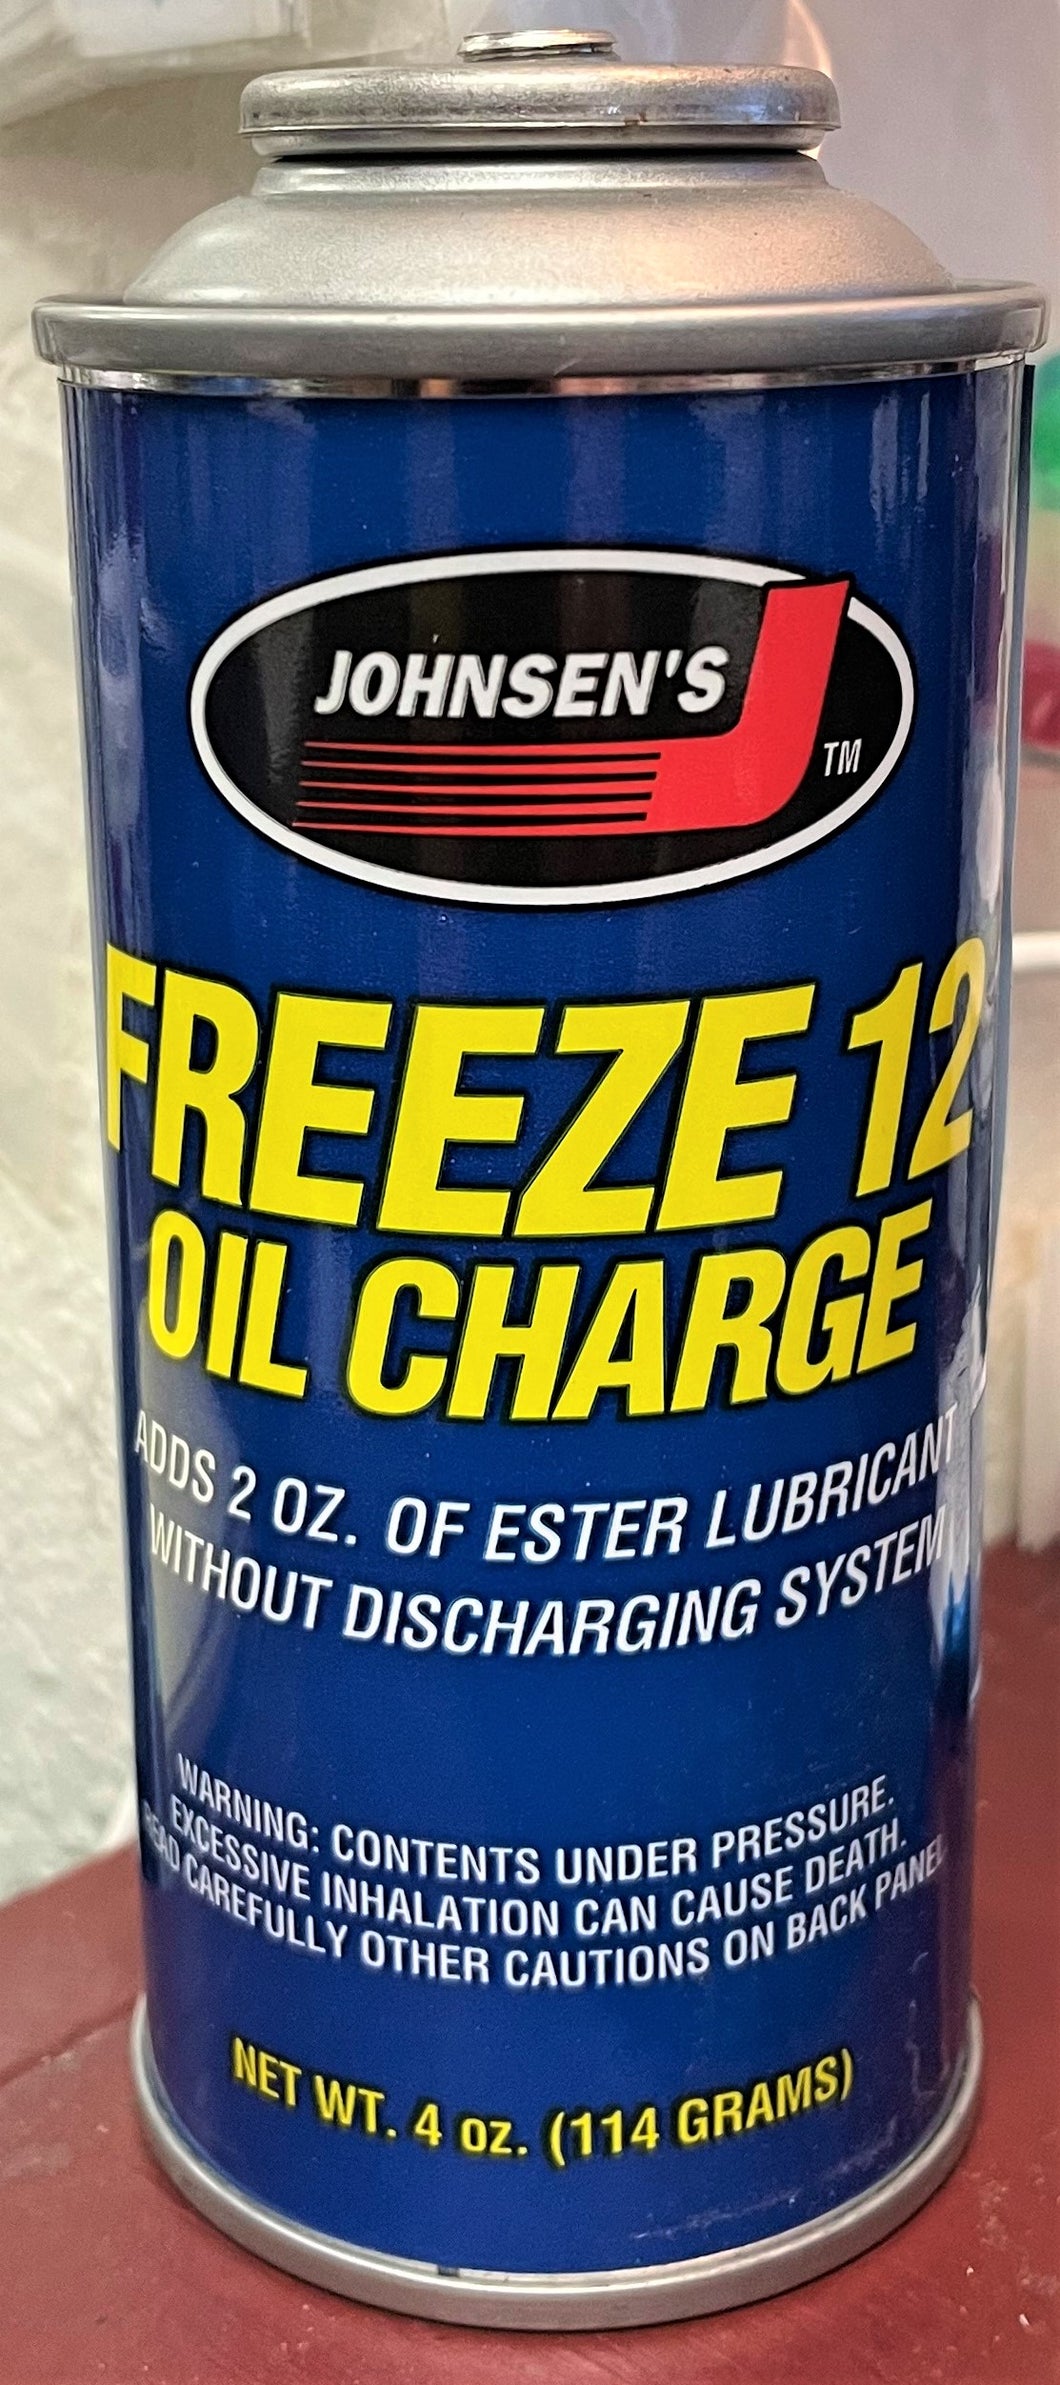 FREEZE 12, R12 Alternate, EPA Approved Replacement Oil Charge, 4 oz. Can